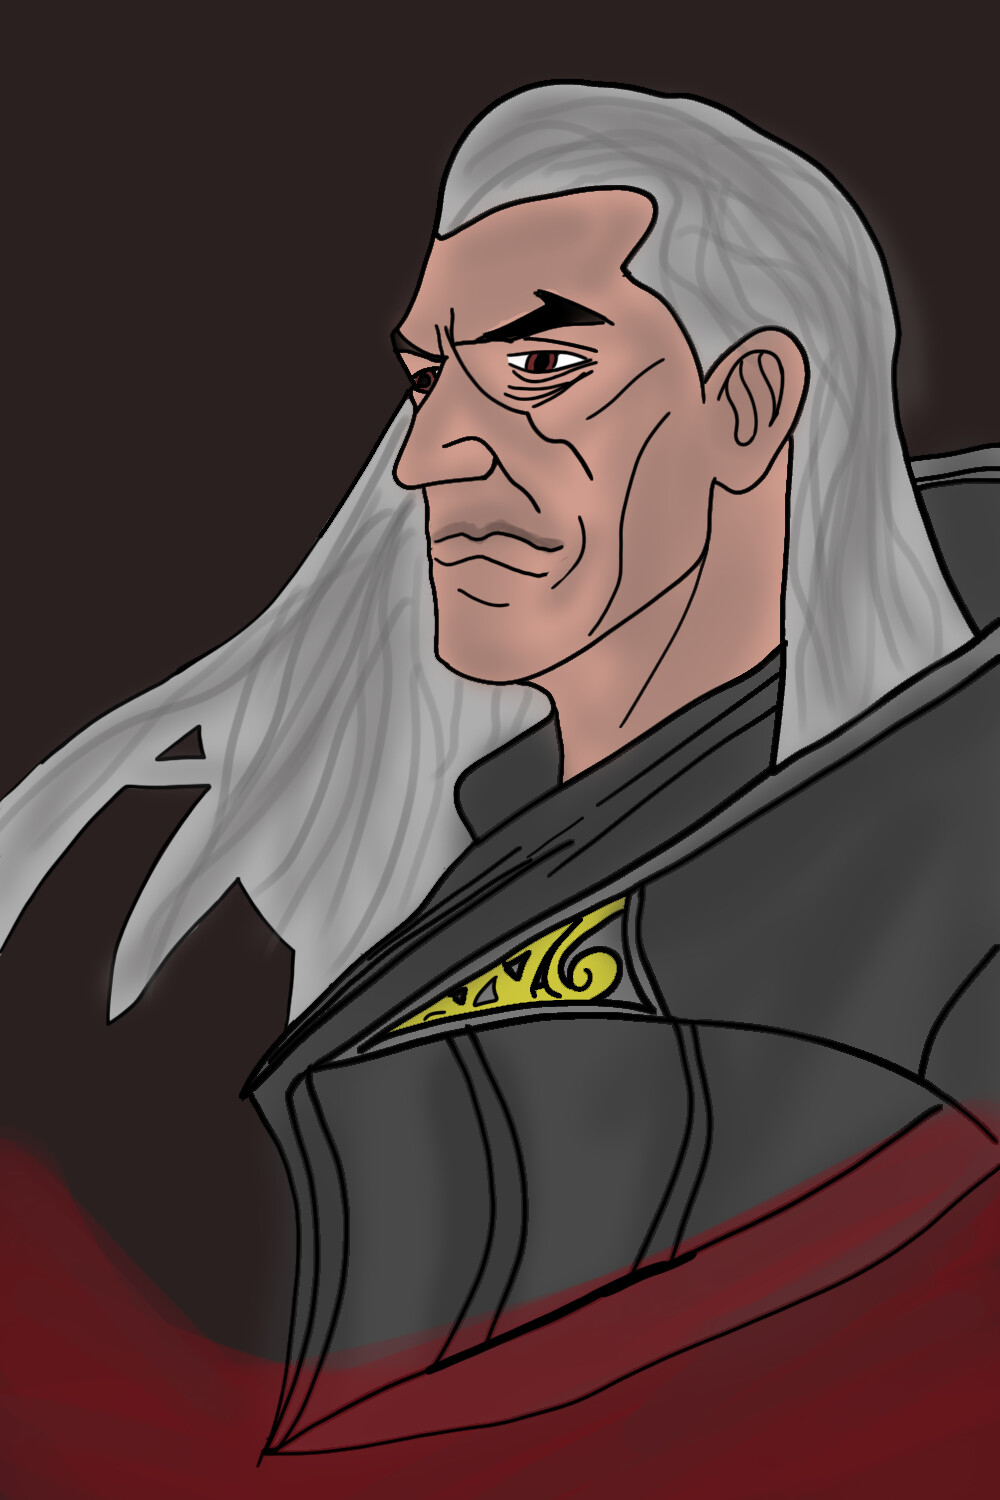 Made a stylised illustration of the Grand General : r/SwainMains